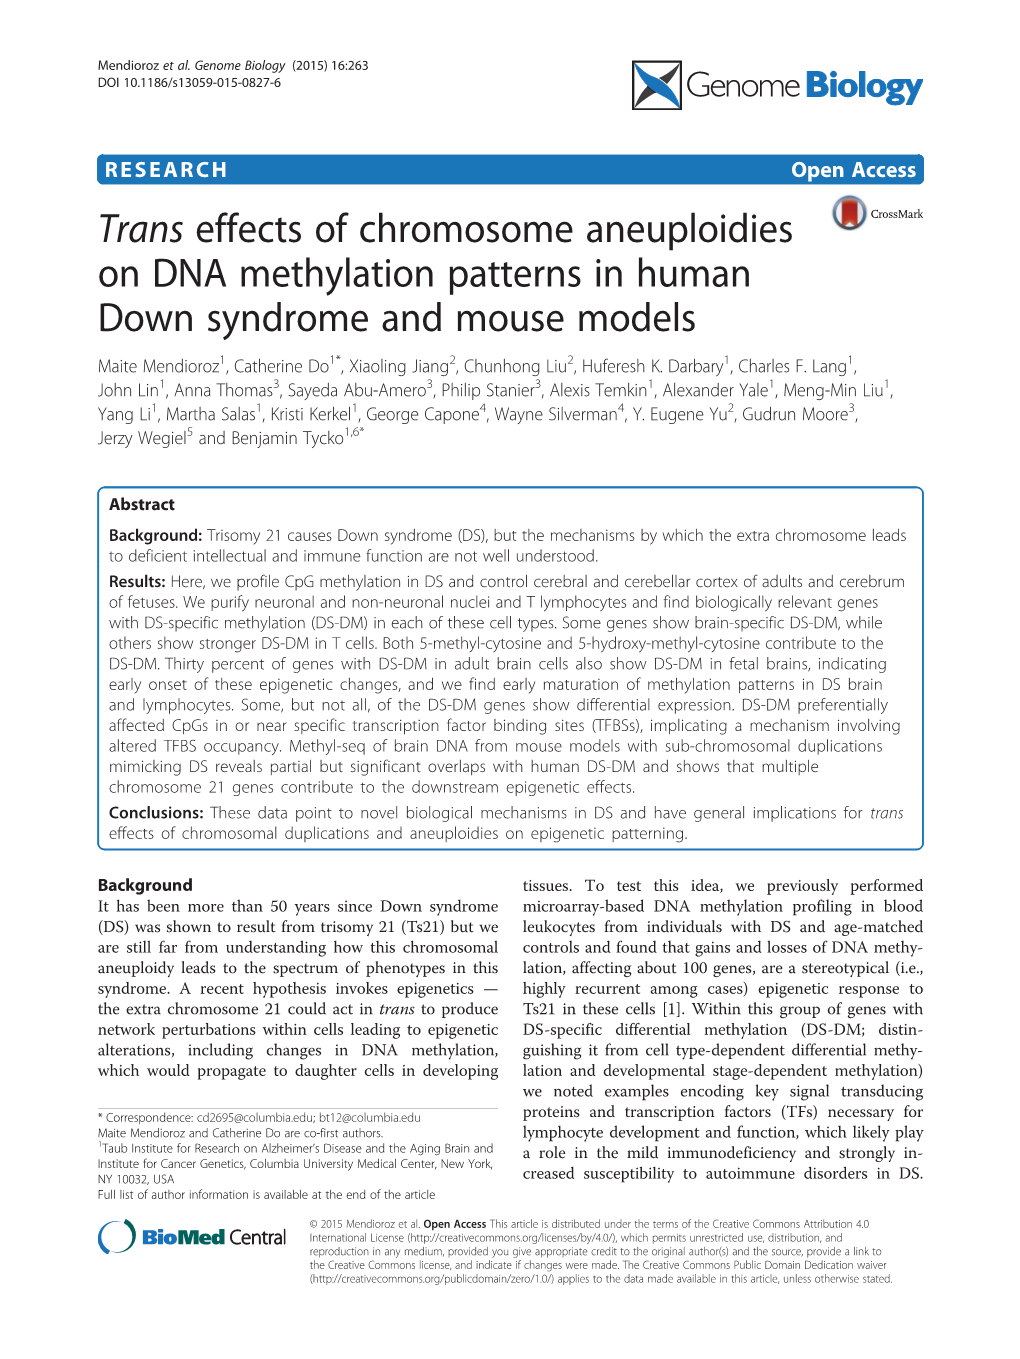 Trans Effects of Chromosome Aneuploidies on DNA Methylation Patterns in Human Down Syndrome and Mouse Models